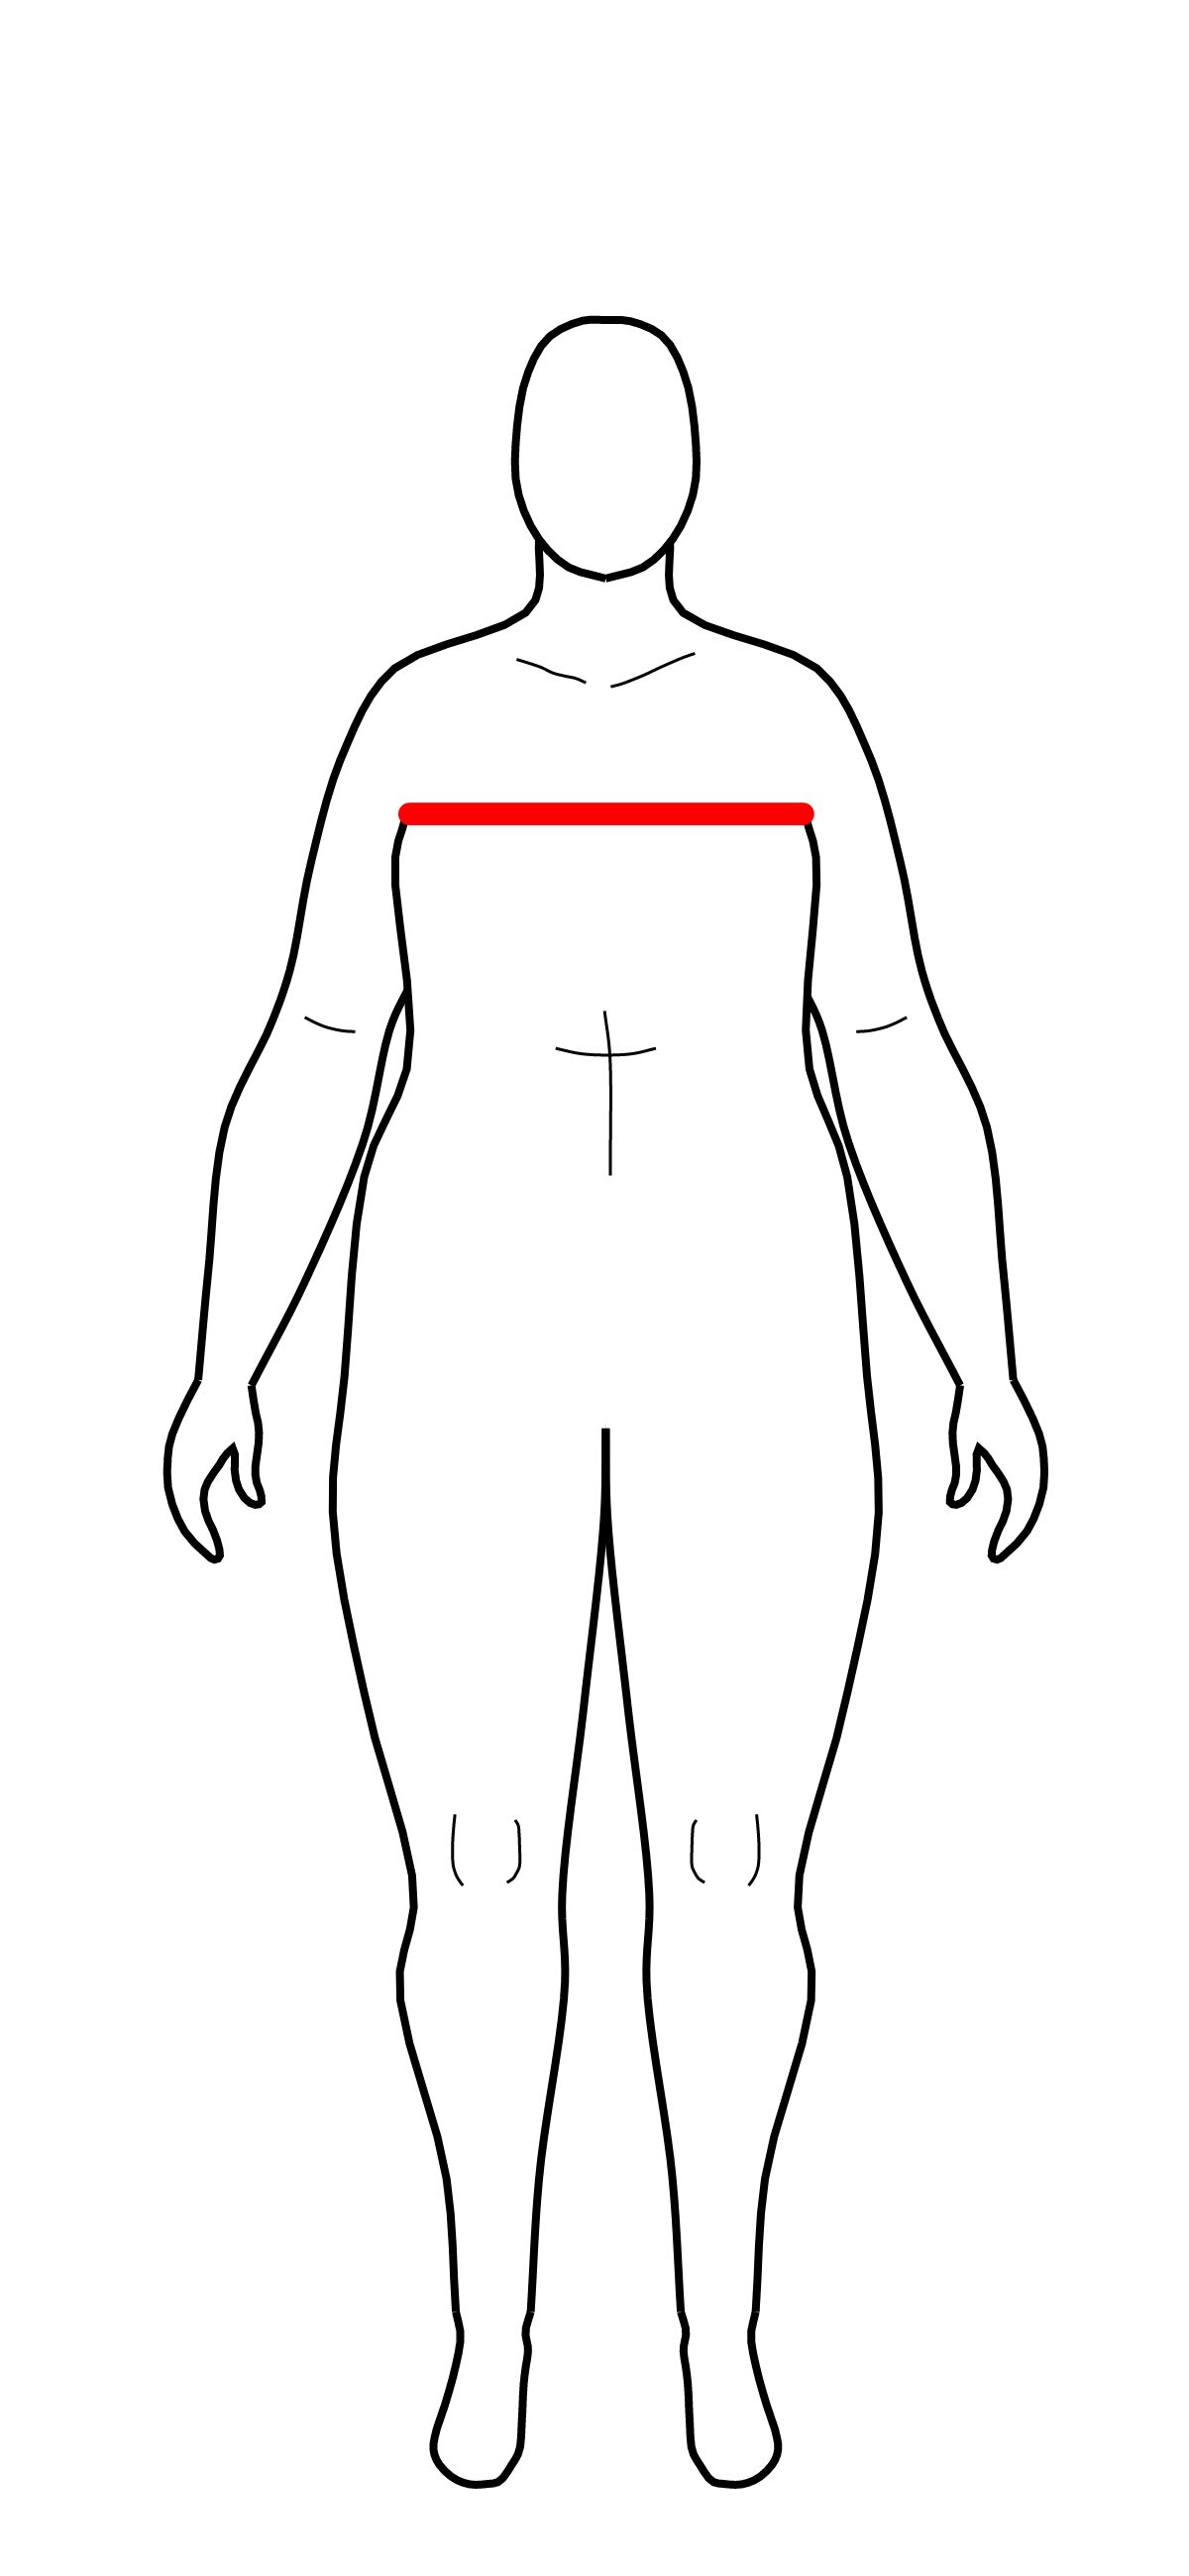 Upper chest circumference with binder (Copy)